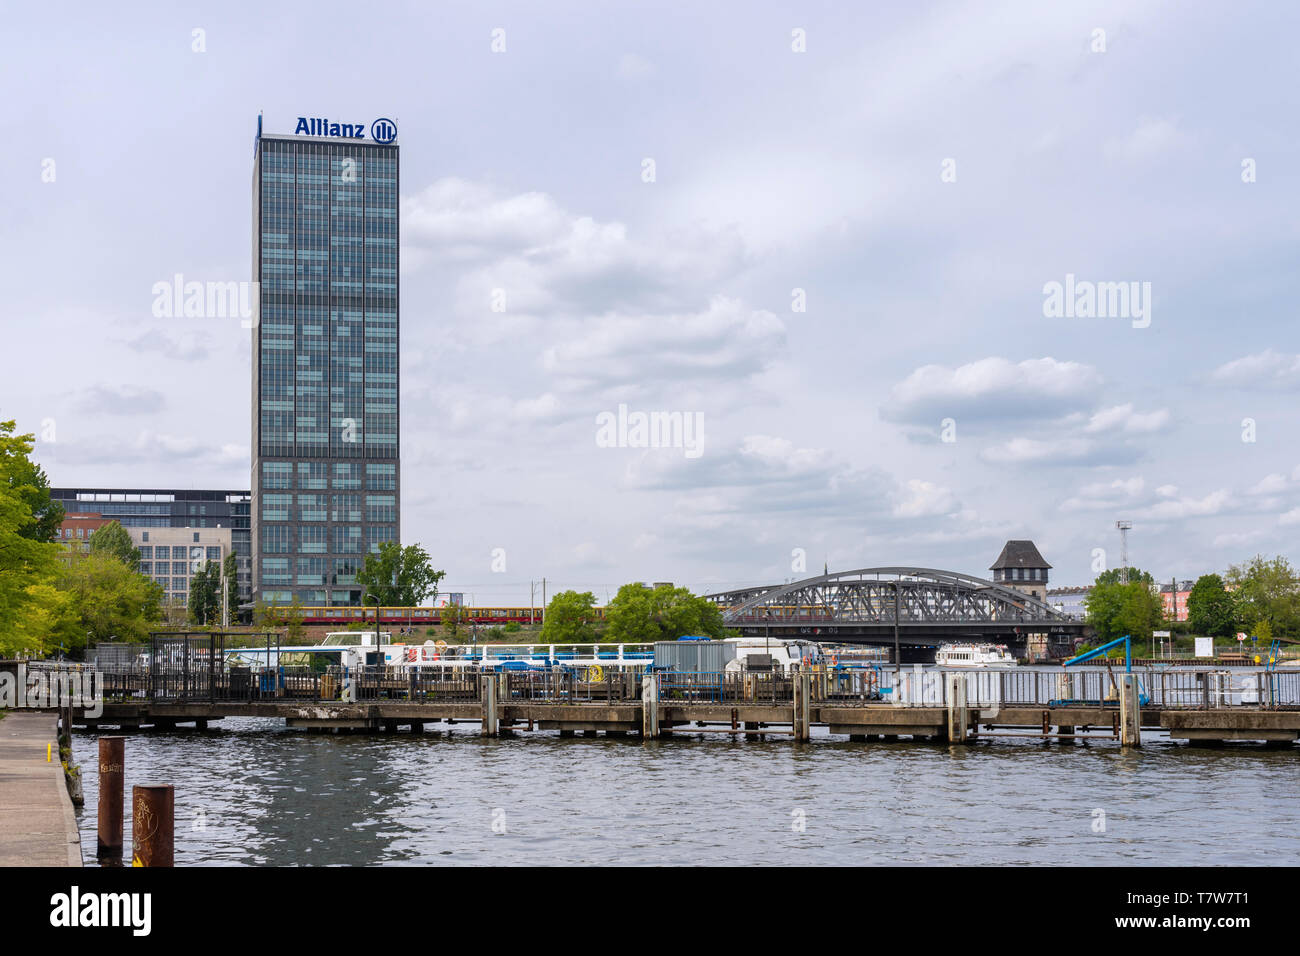 View across the river Spree in Treptower Park, the Allianz tower to the left and Elsen bridge to the right 2019, Berlin Treptow district, Germany Stock Photo